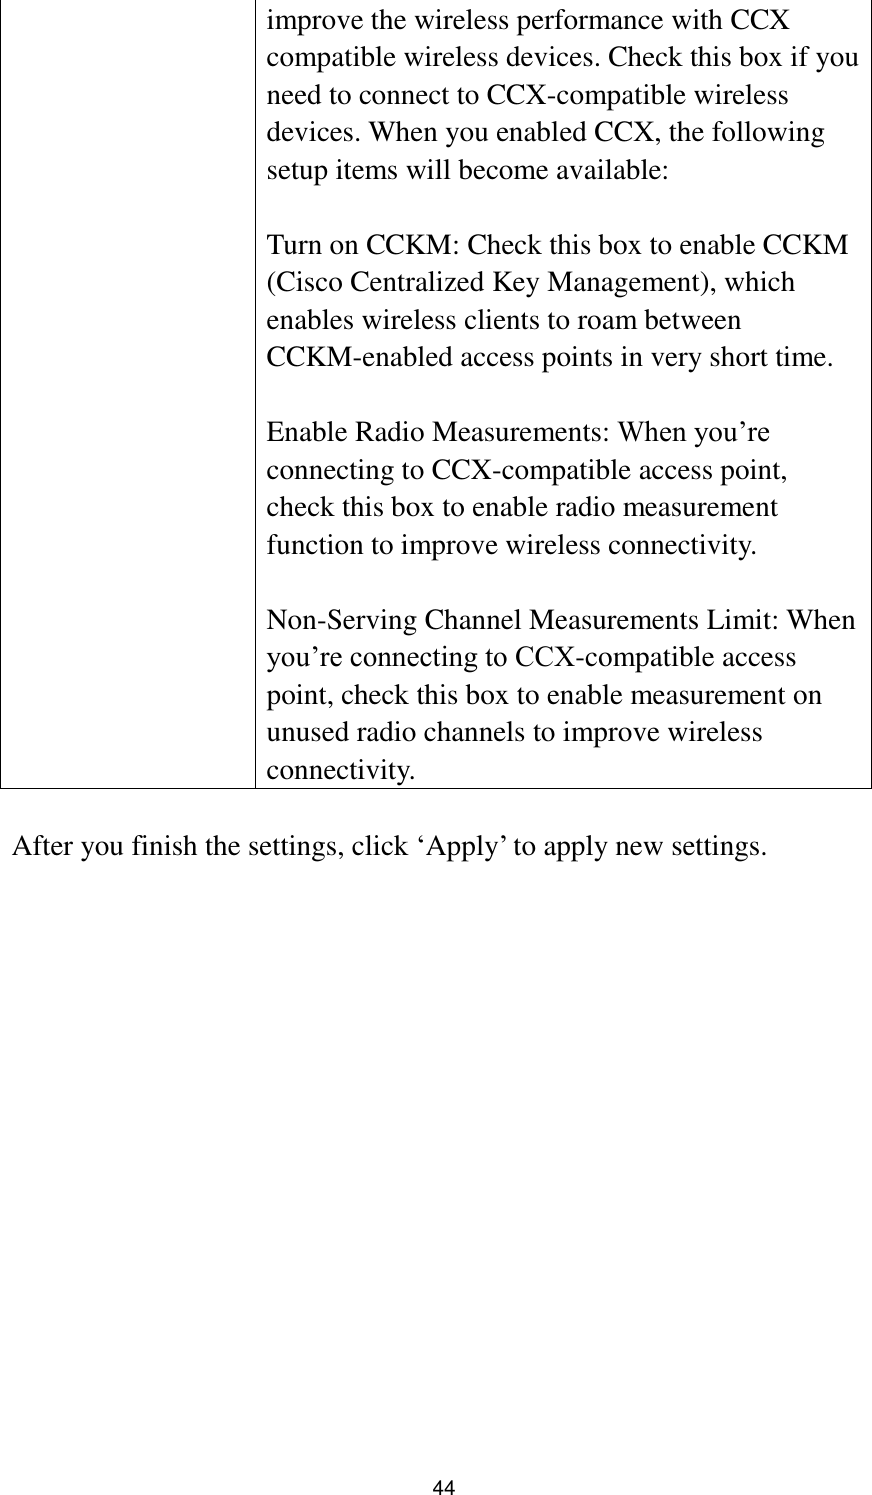  44 improve the wireless performance with CCX compatible wireless devices. Check this box if you need to connect to CCX-compatible wireless devices. When you enabled CCX, the following setup items will become available:  Turn on CCKM: Check this box to enable CCKM (Cisco Centralized Key Management), which enables wireless clients to roam between CCKM-enabled access points in very short time.  Enable Radio Measurements: When you‟re connecting to CCX-compatible access point, check this box to enable radio measurement function to improve wireless connectivity.  Non-Serving Channel Measurements Limit: When you‟re connecting to CCX-compatible access point, check this box to enable measurement on unused radio channels to improve wireless connectivity.  After you finish the settings, click „Apply‟ to apply new settings.  